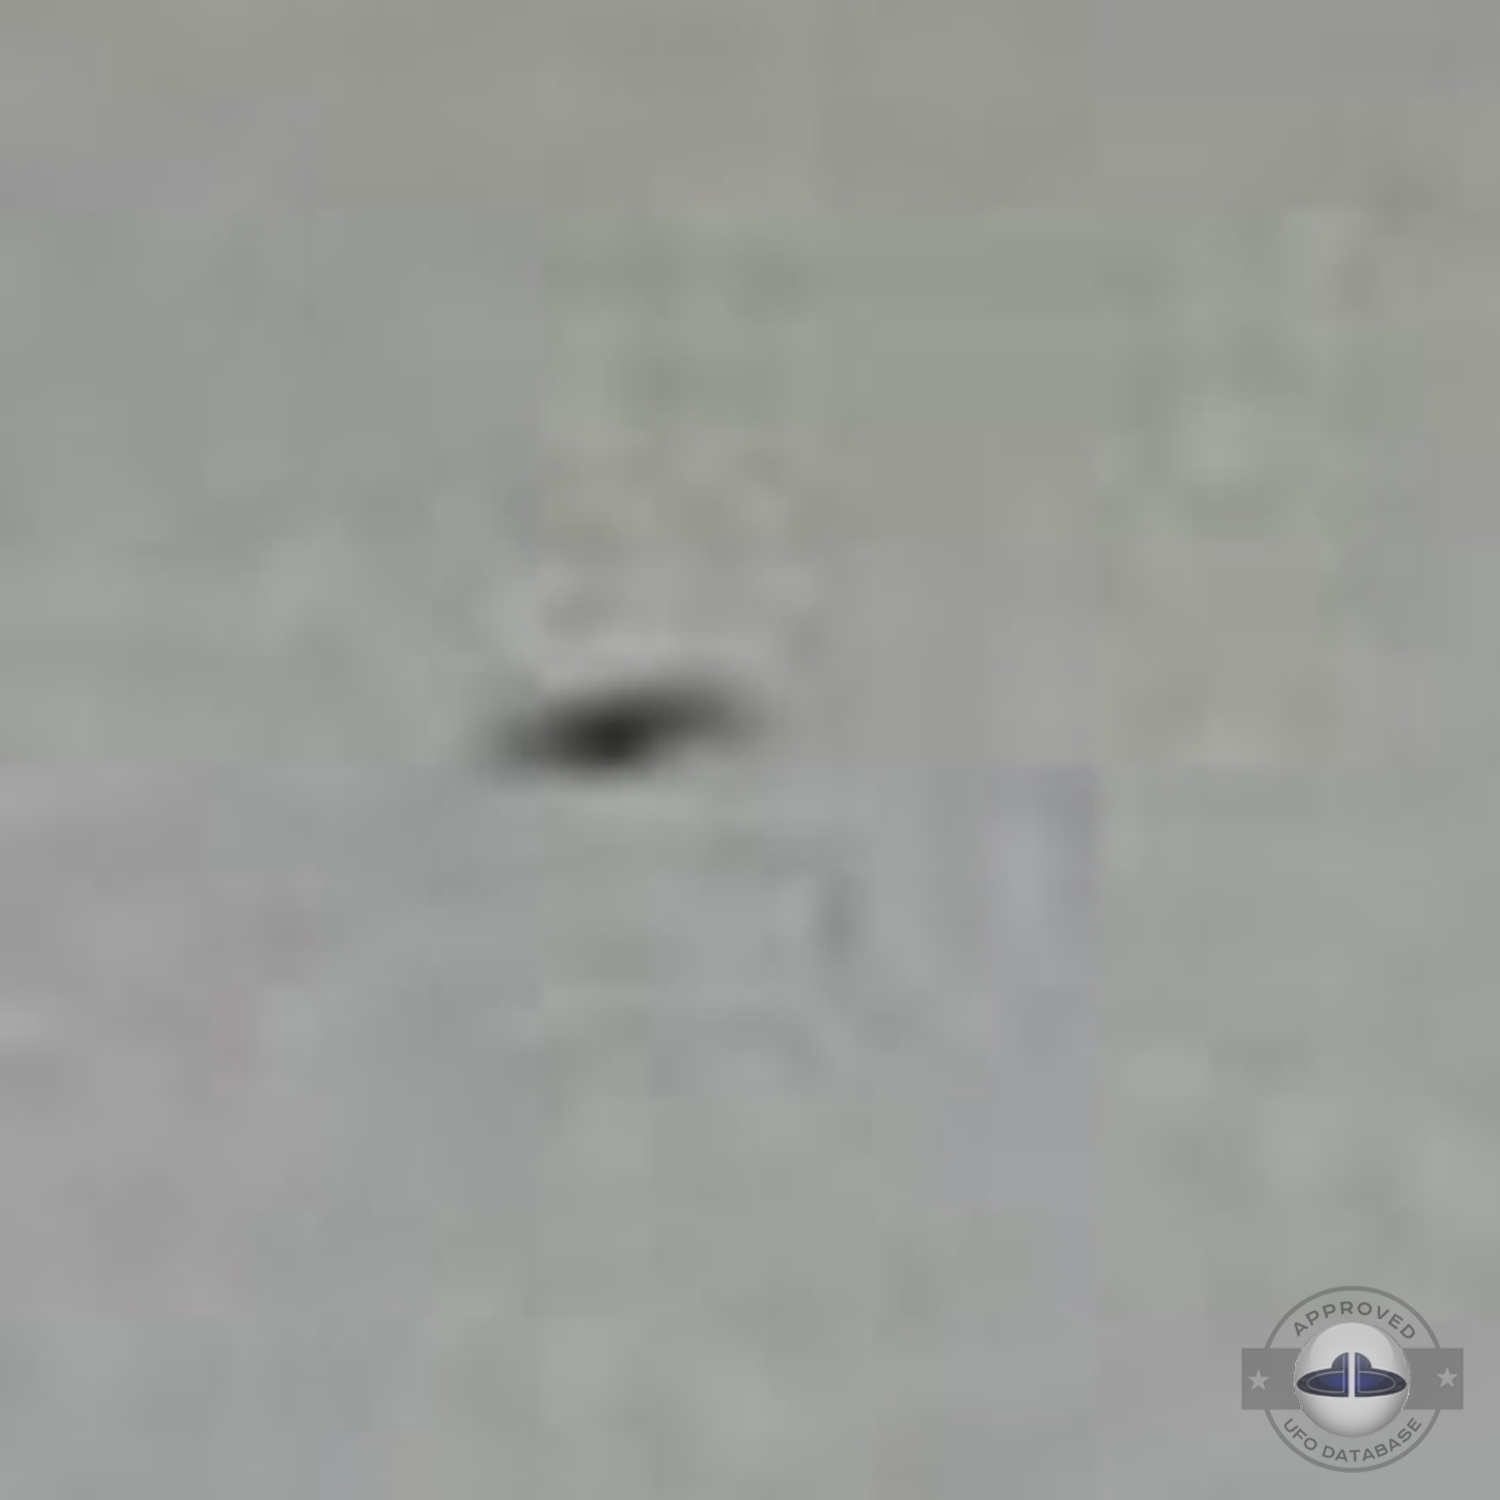 UFO picture taken in 2005 showing ufo close to coming airplane UFO Picture #24-5